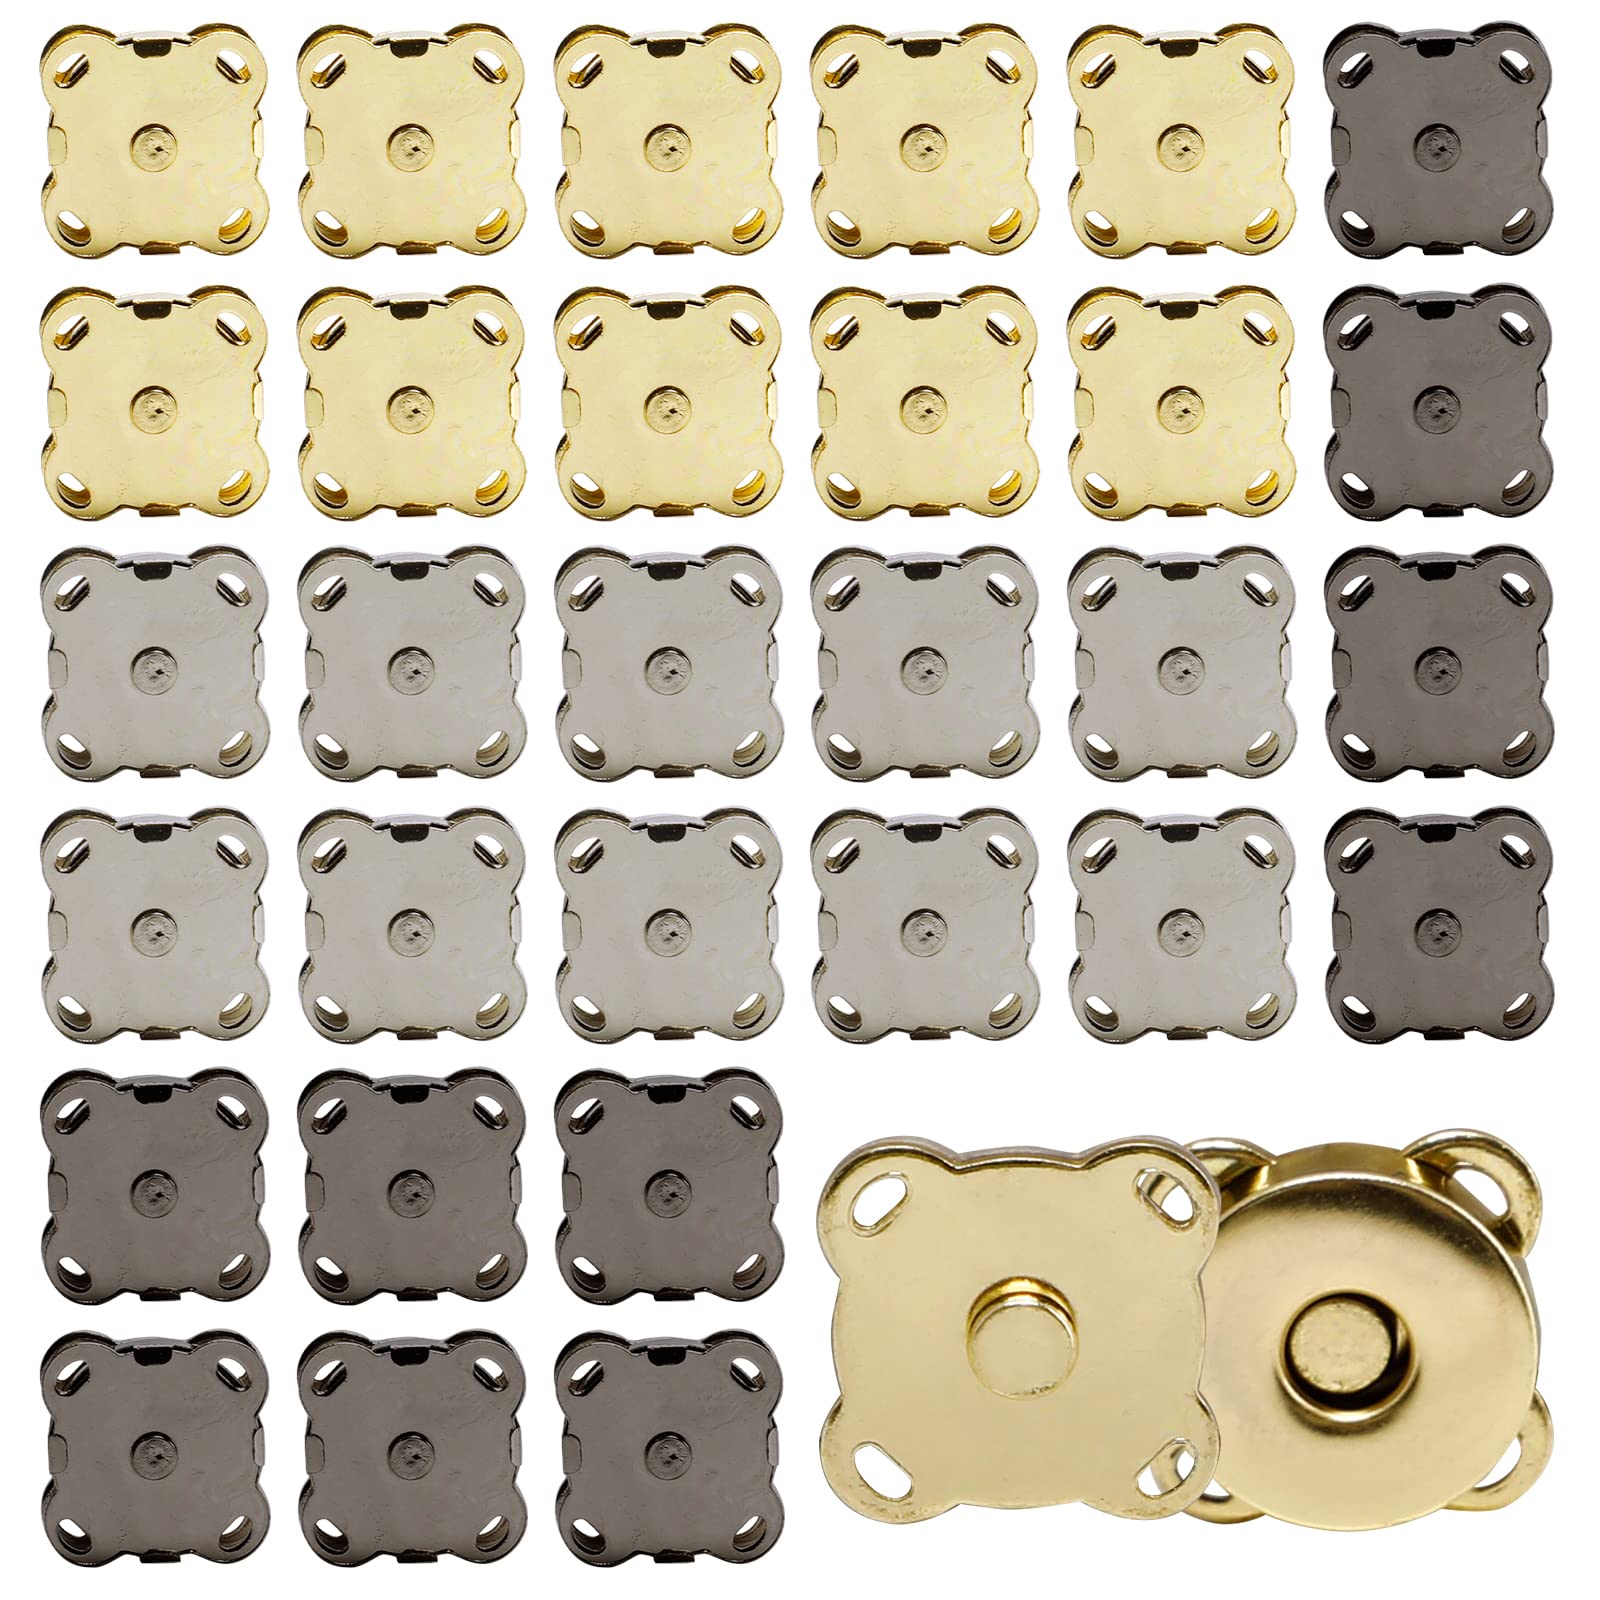 50 Sets Magnetic Purse Snap Clasps Button /Great for Closure Purse Handbag Clothes Sewing Craft Silver